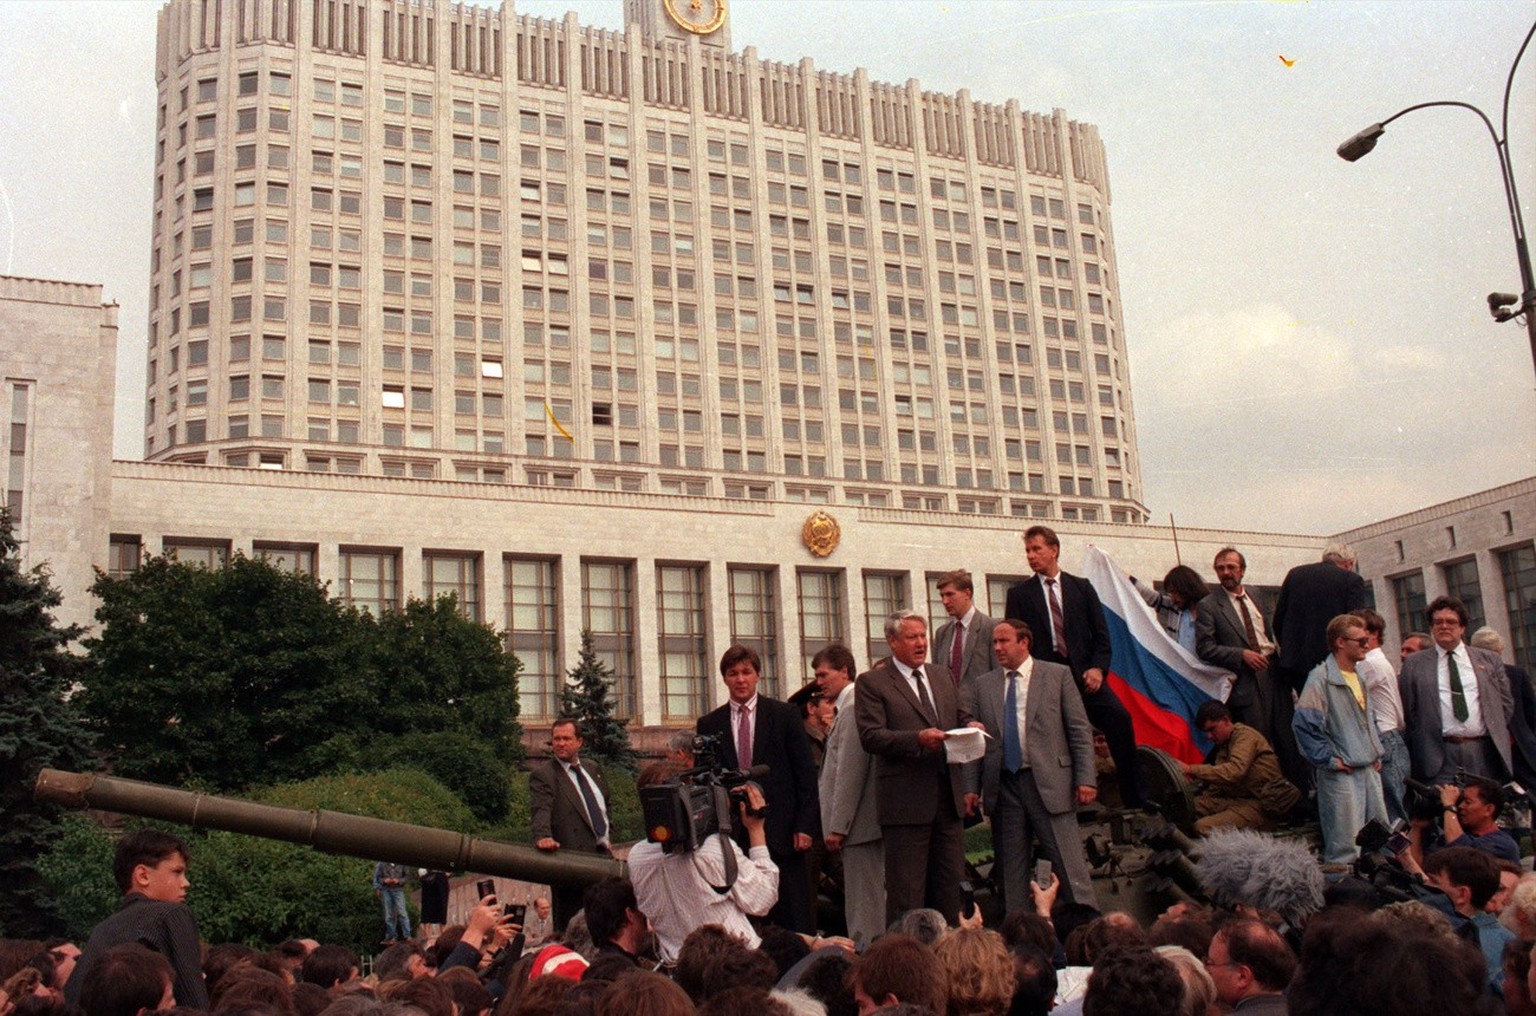 Boris Yeltsin makes a speech from atop a tank in front of the Russian Parliment in this August 19, 1991 photo. Yeltsin, who engineered the final collapse of the Soviet Union and pushed Russia to embra ...